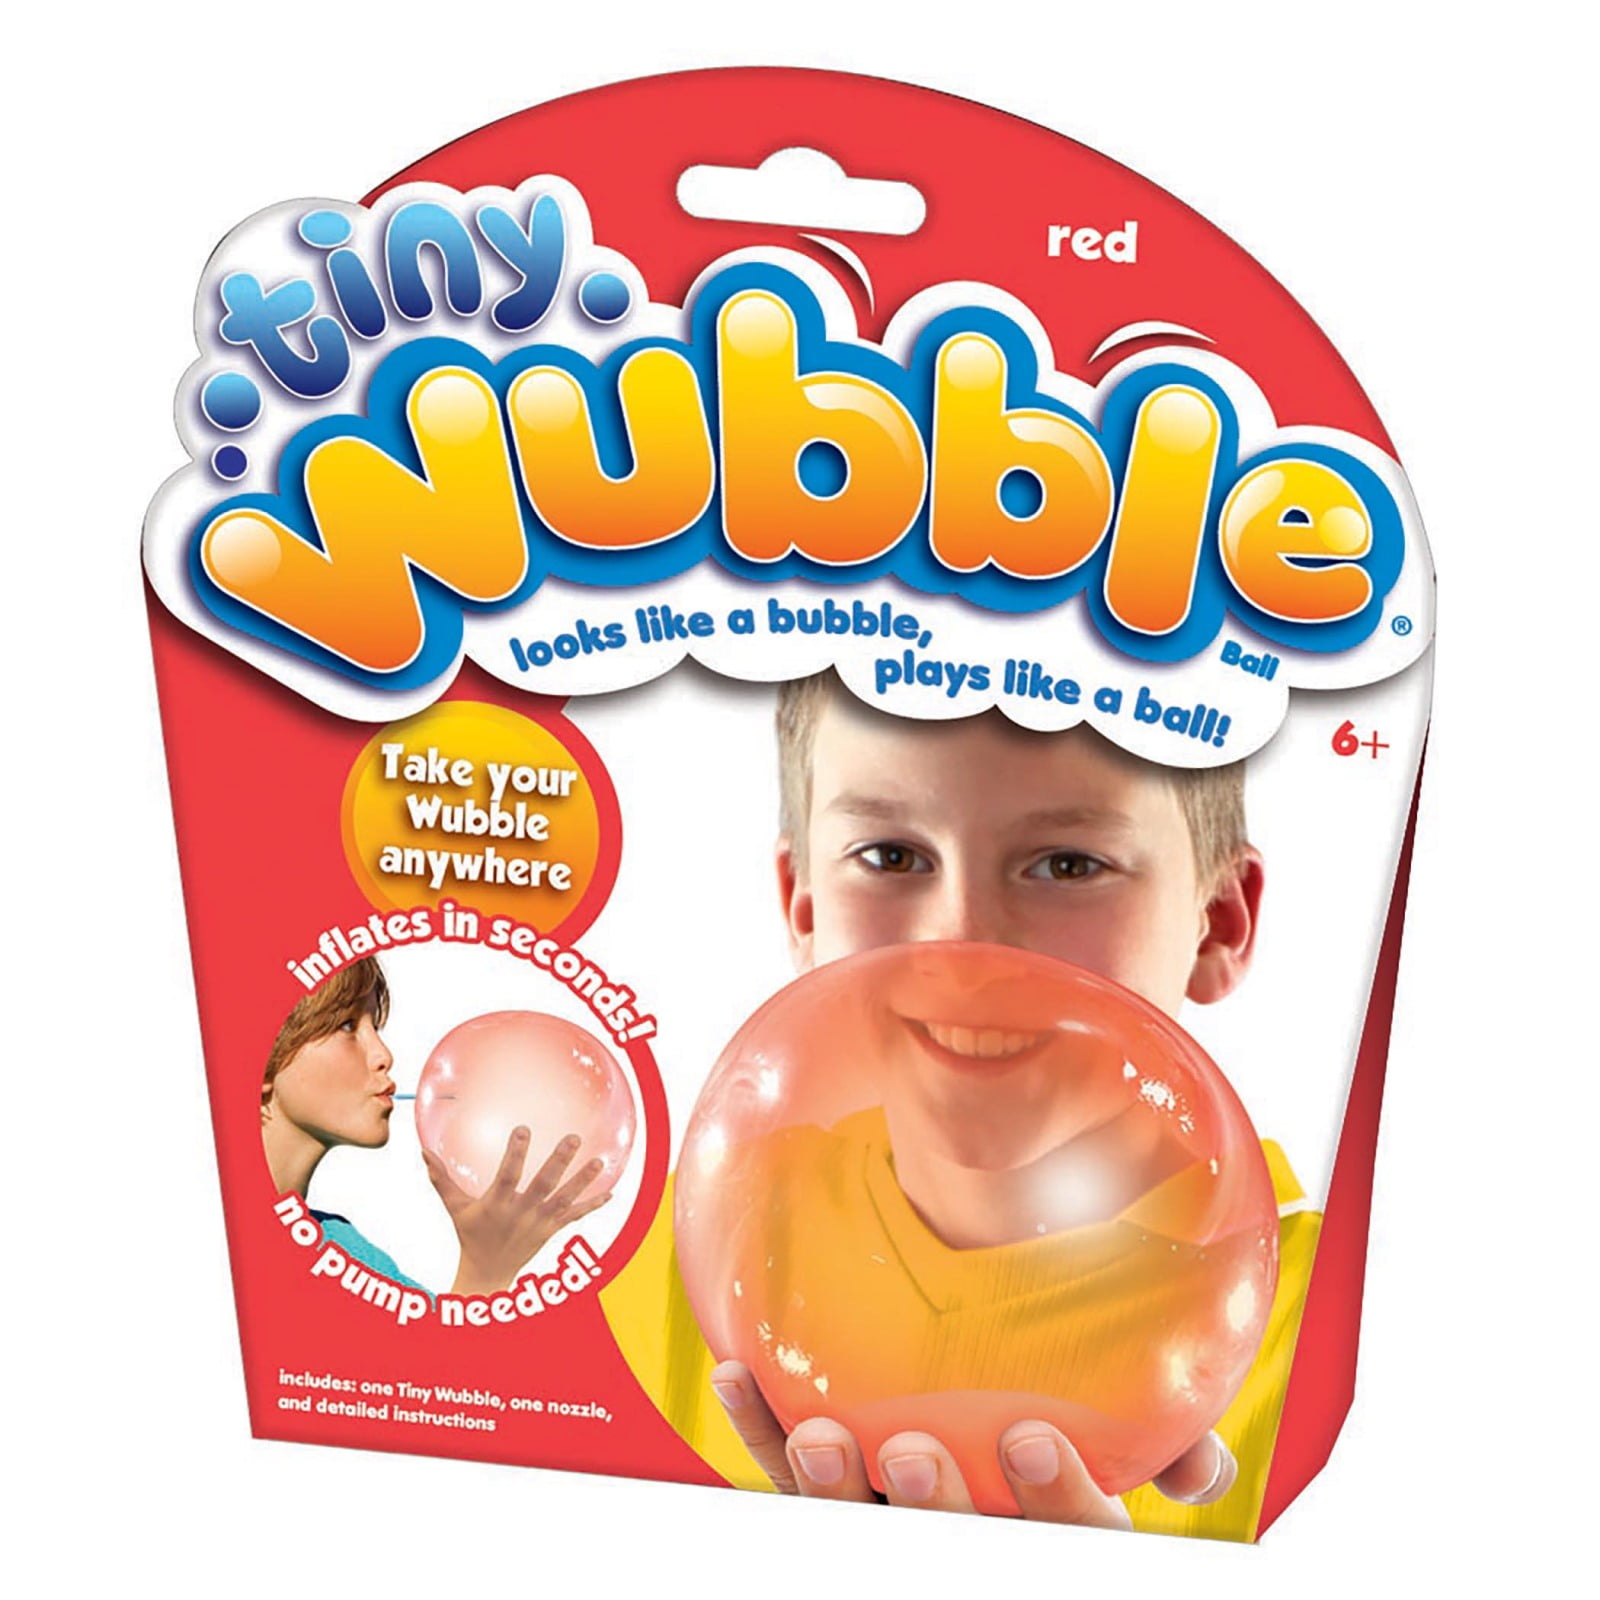 Blue Green Red Pink Color Set Lot of 4 Tiny Wubble Bubble Ball